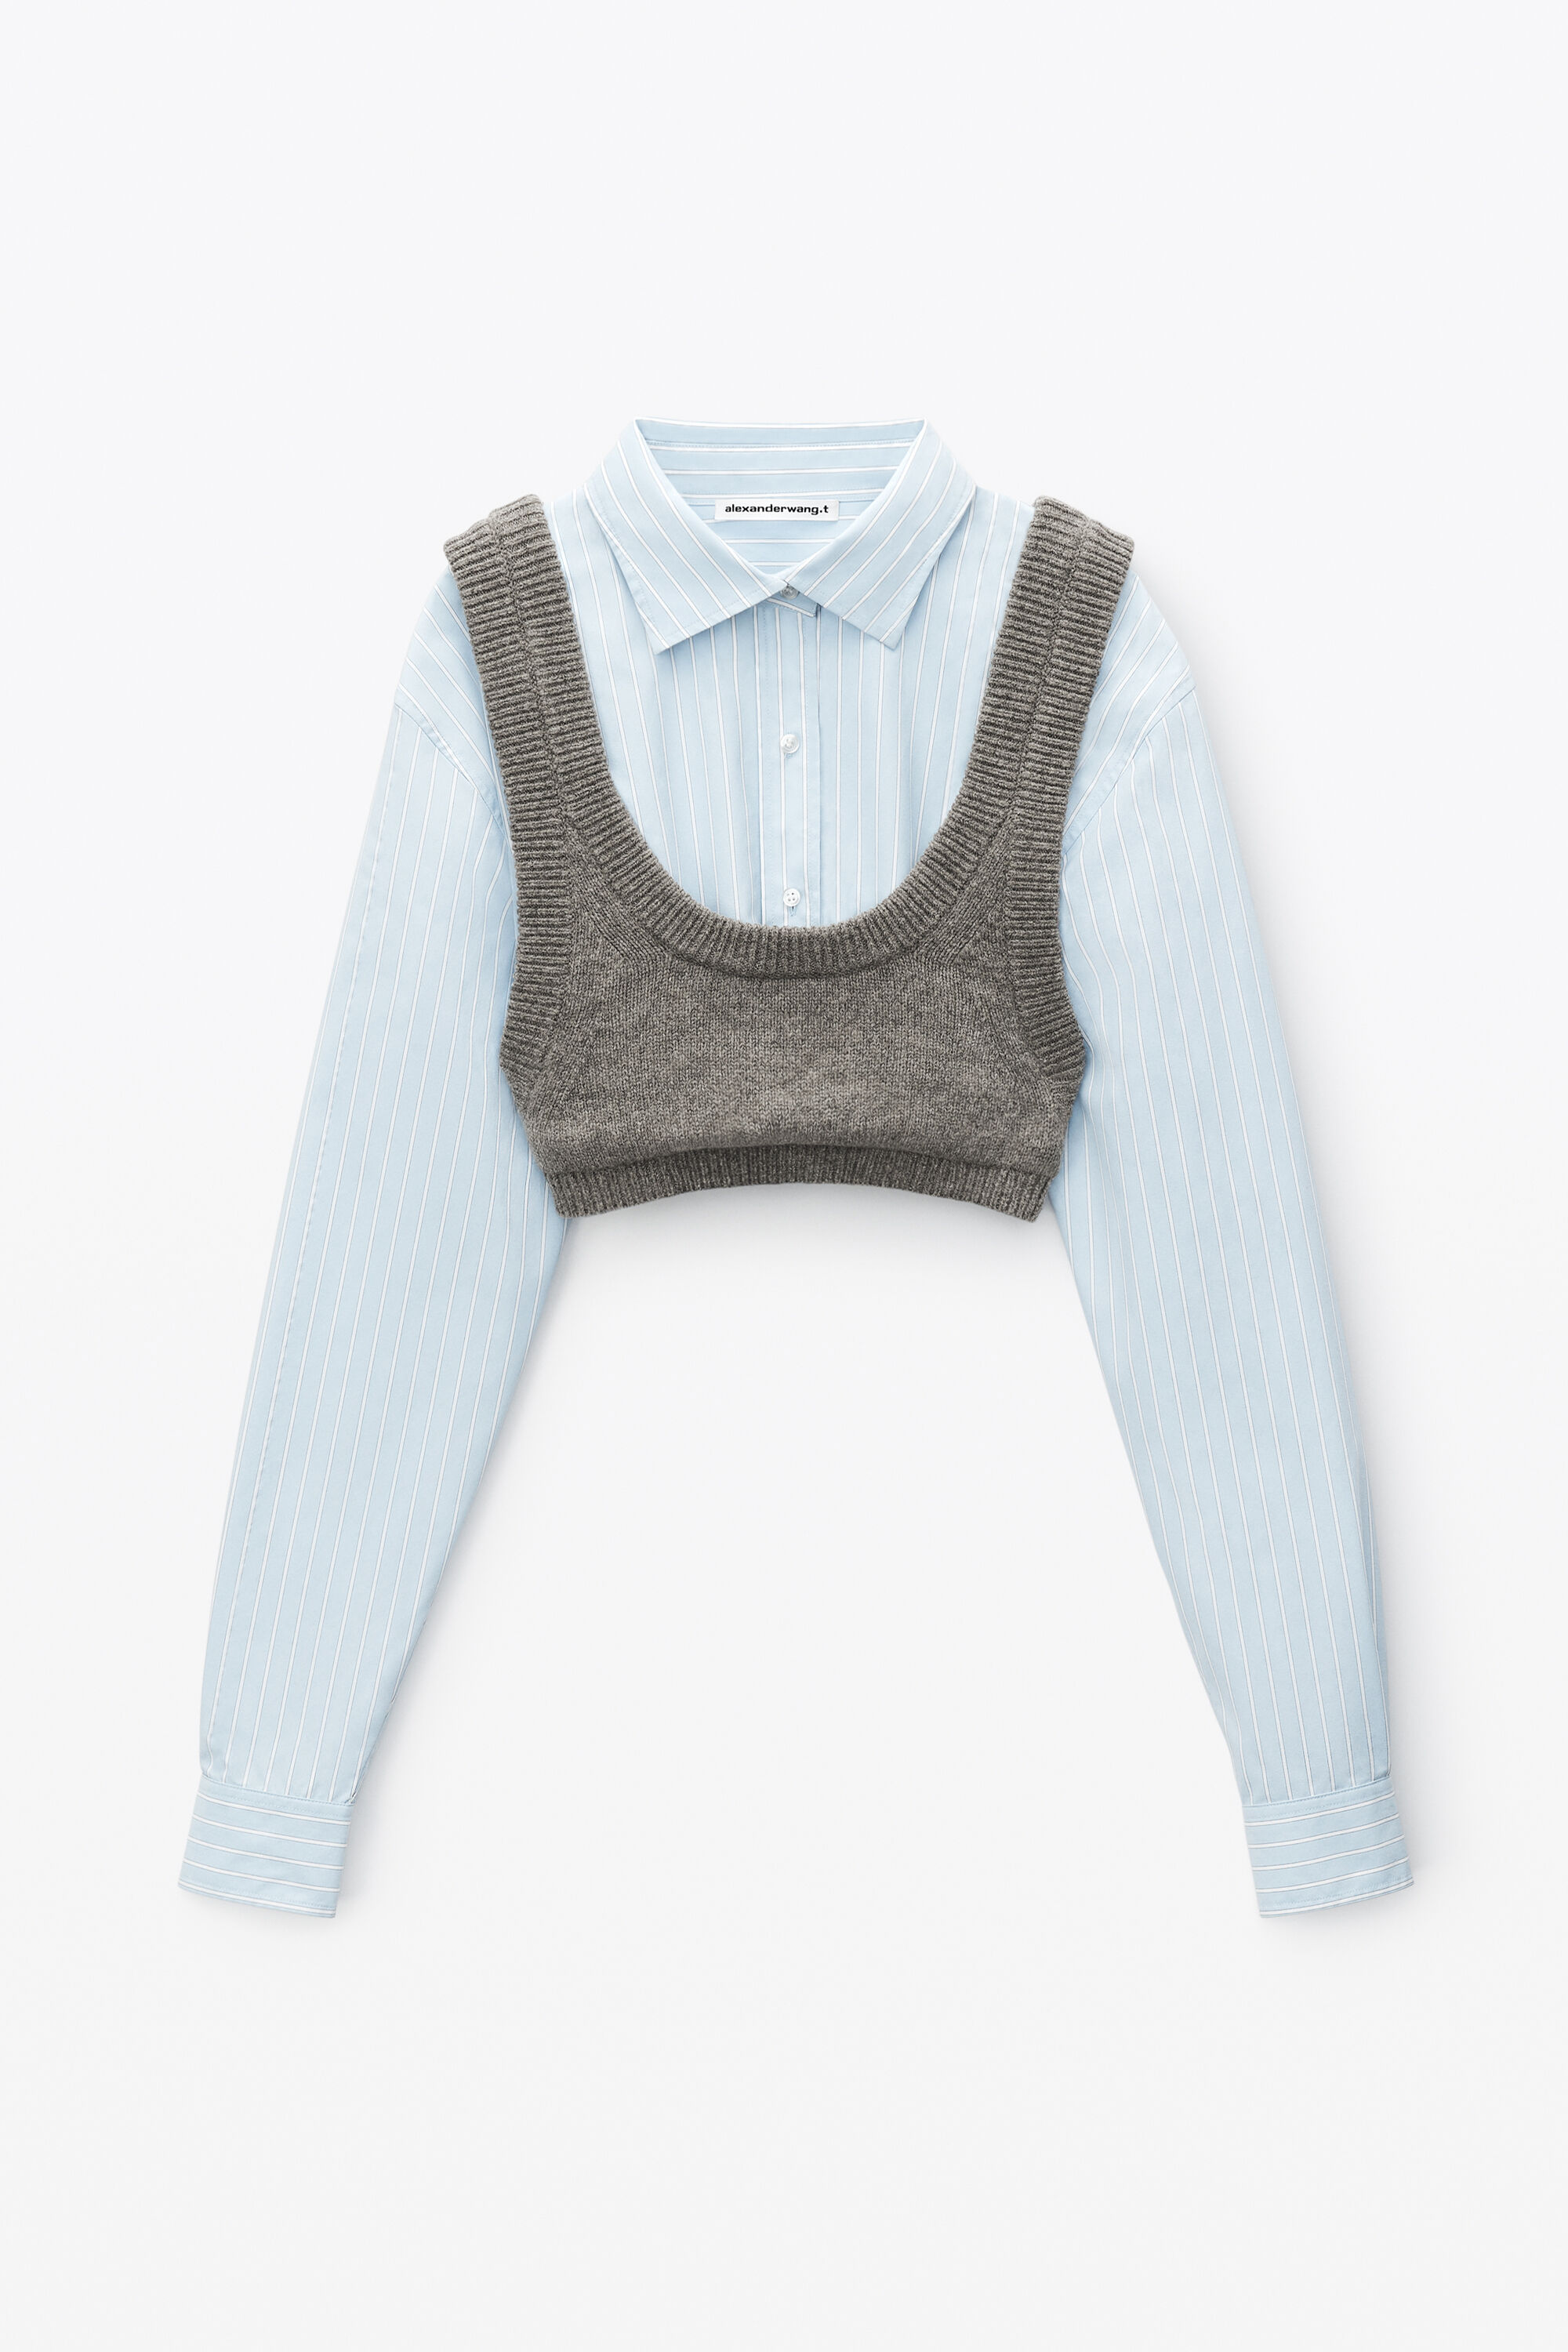 alexanderwang LAYERED KNIT CAMISOLE IN BOILED WOOL HEATHER GREY 